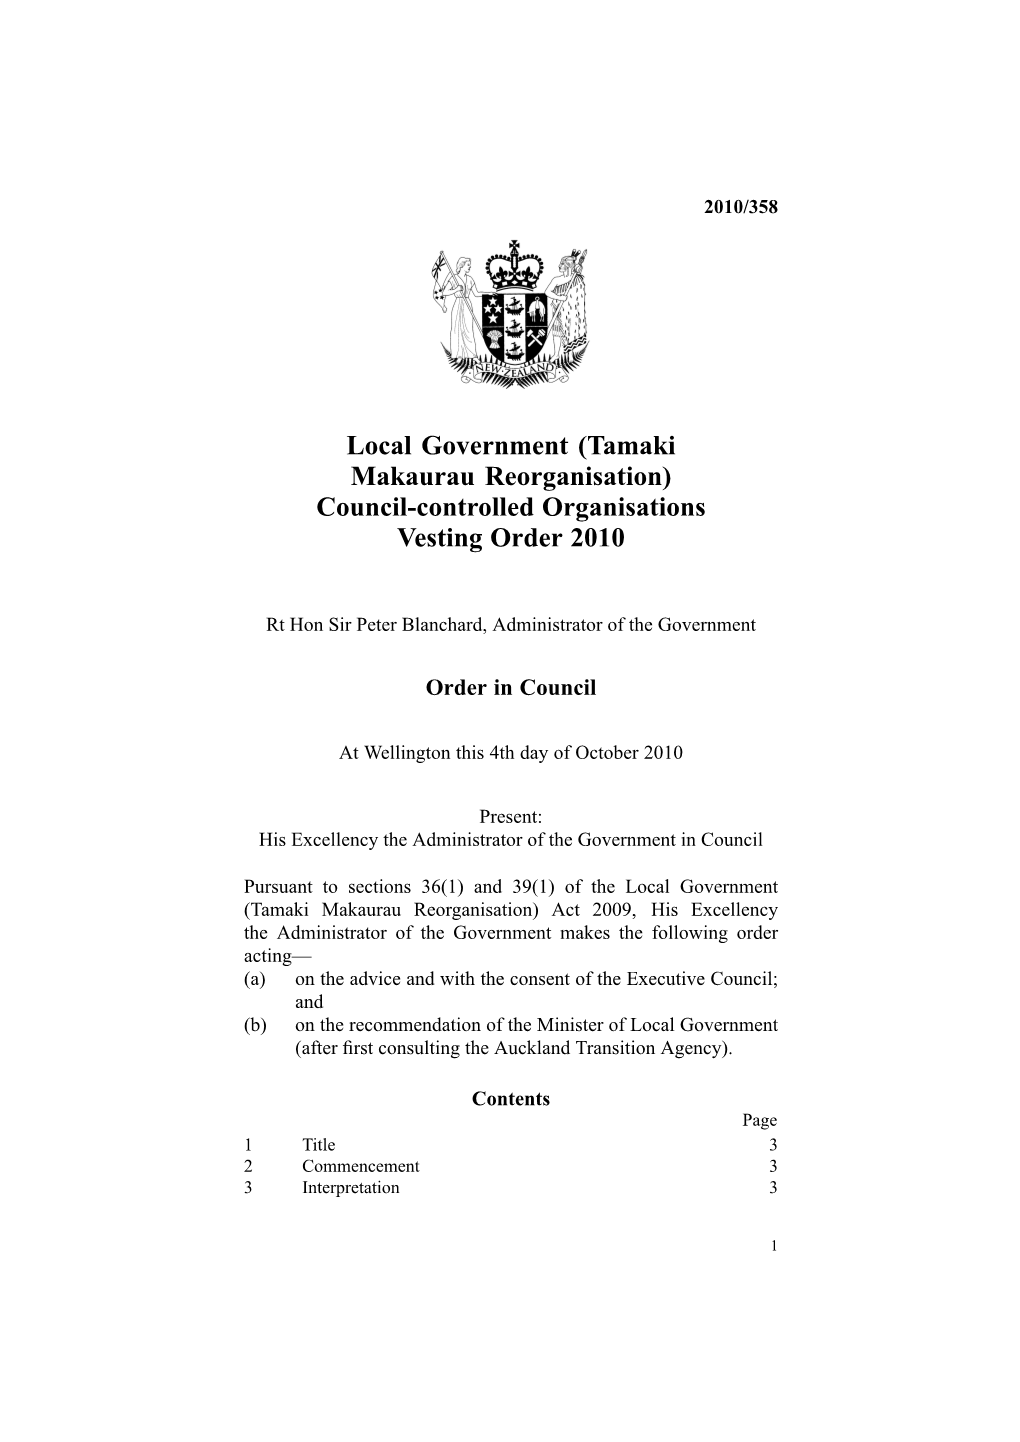 Local Government (Tamaki Makaurau Reorganisation) Council-Controlled Organisations Vesting Order 2010